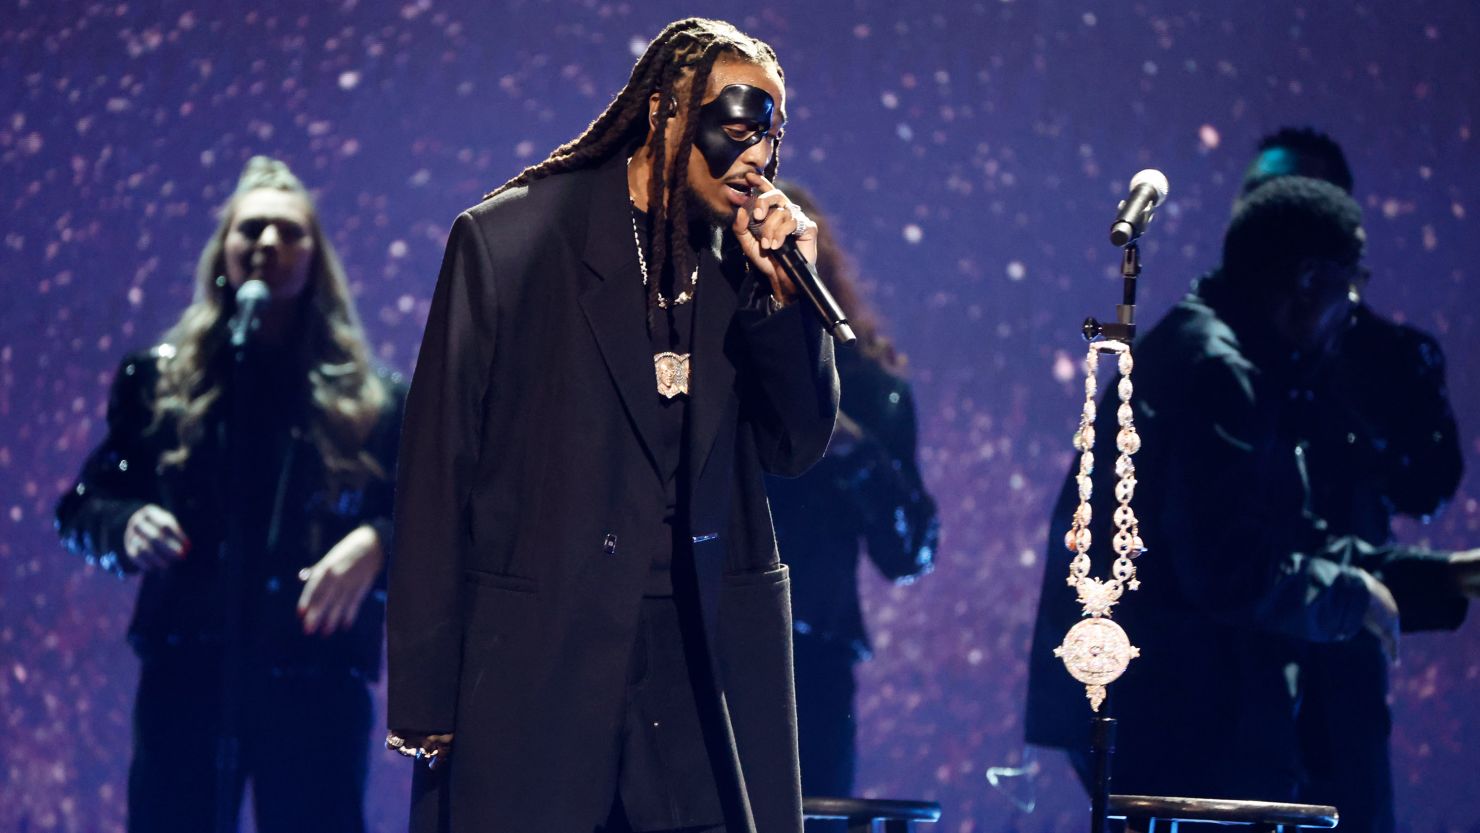 Quavo performed a tribute to Takeoff, his nephew and fellow Migos member, who was killed in November.